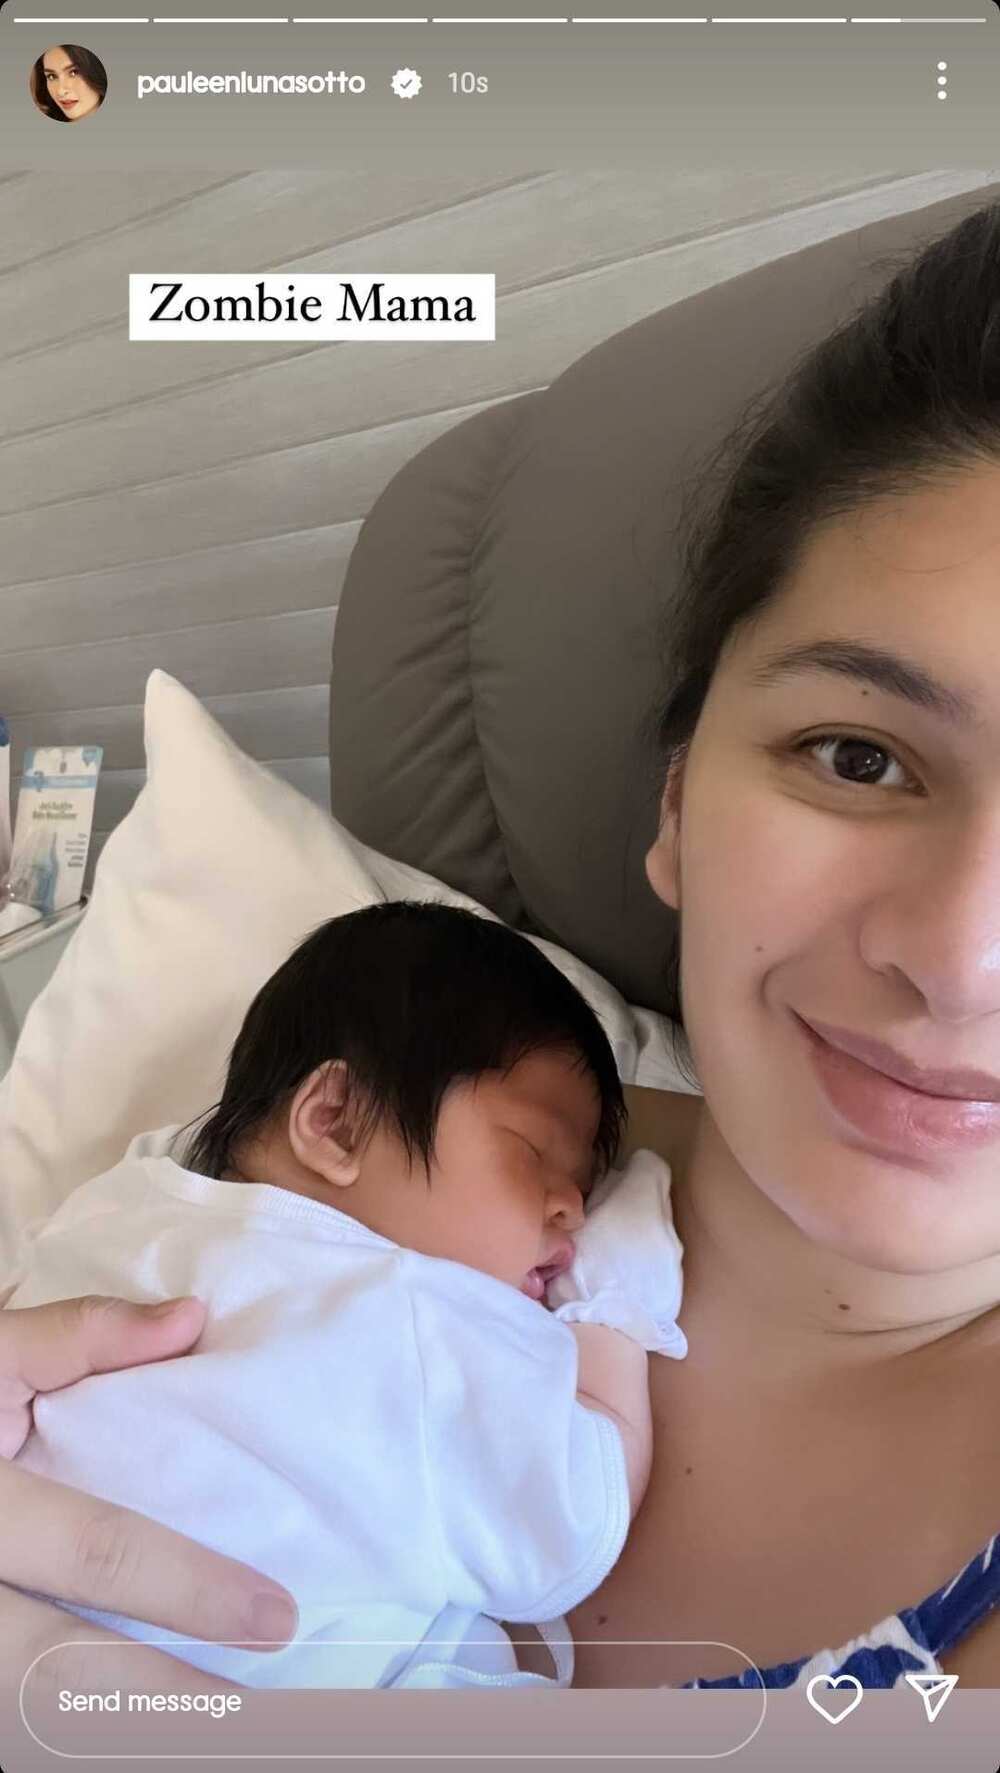 Pauleen Luna posts new selfie with Baby Thia; calls herself a "zombie mama"